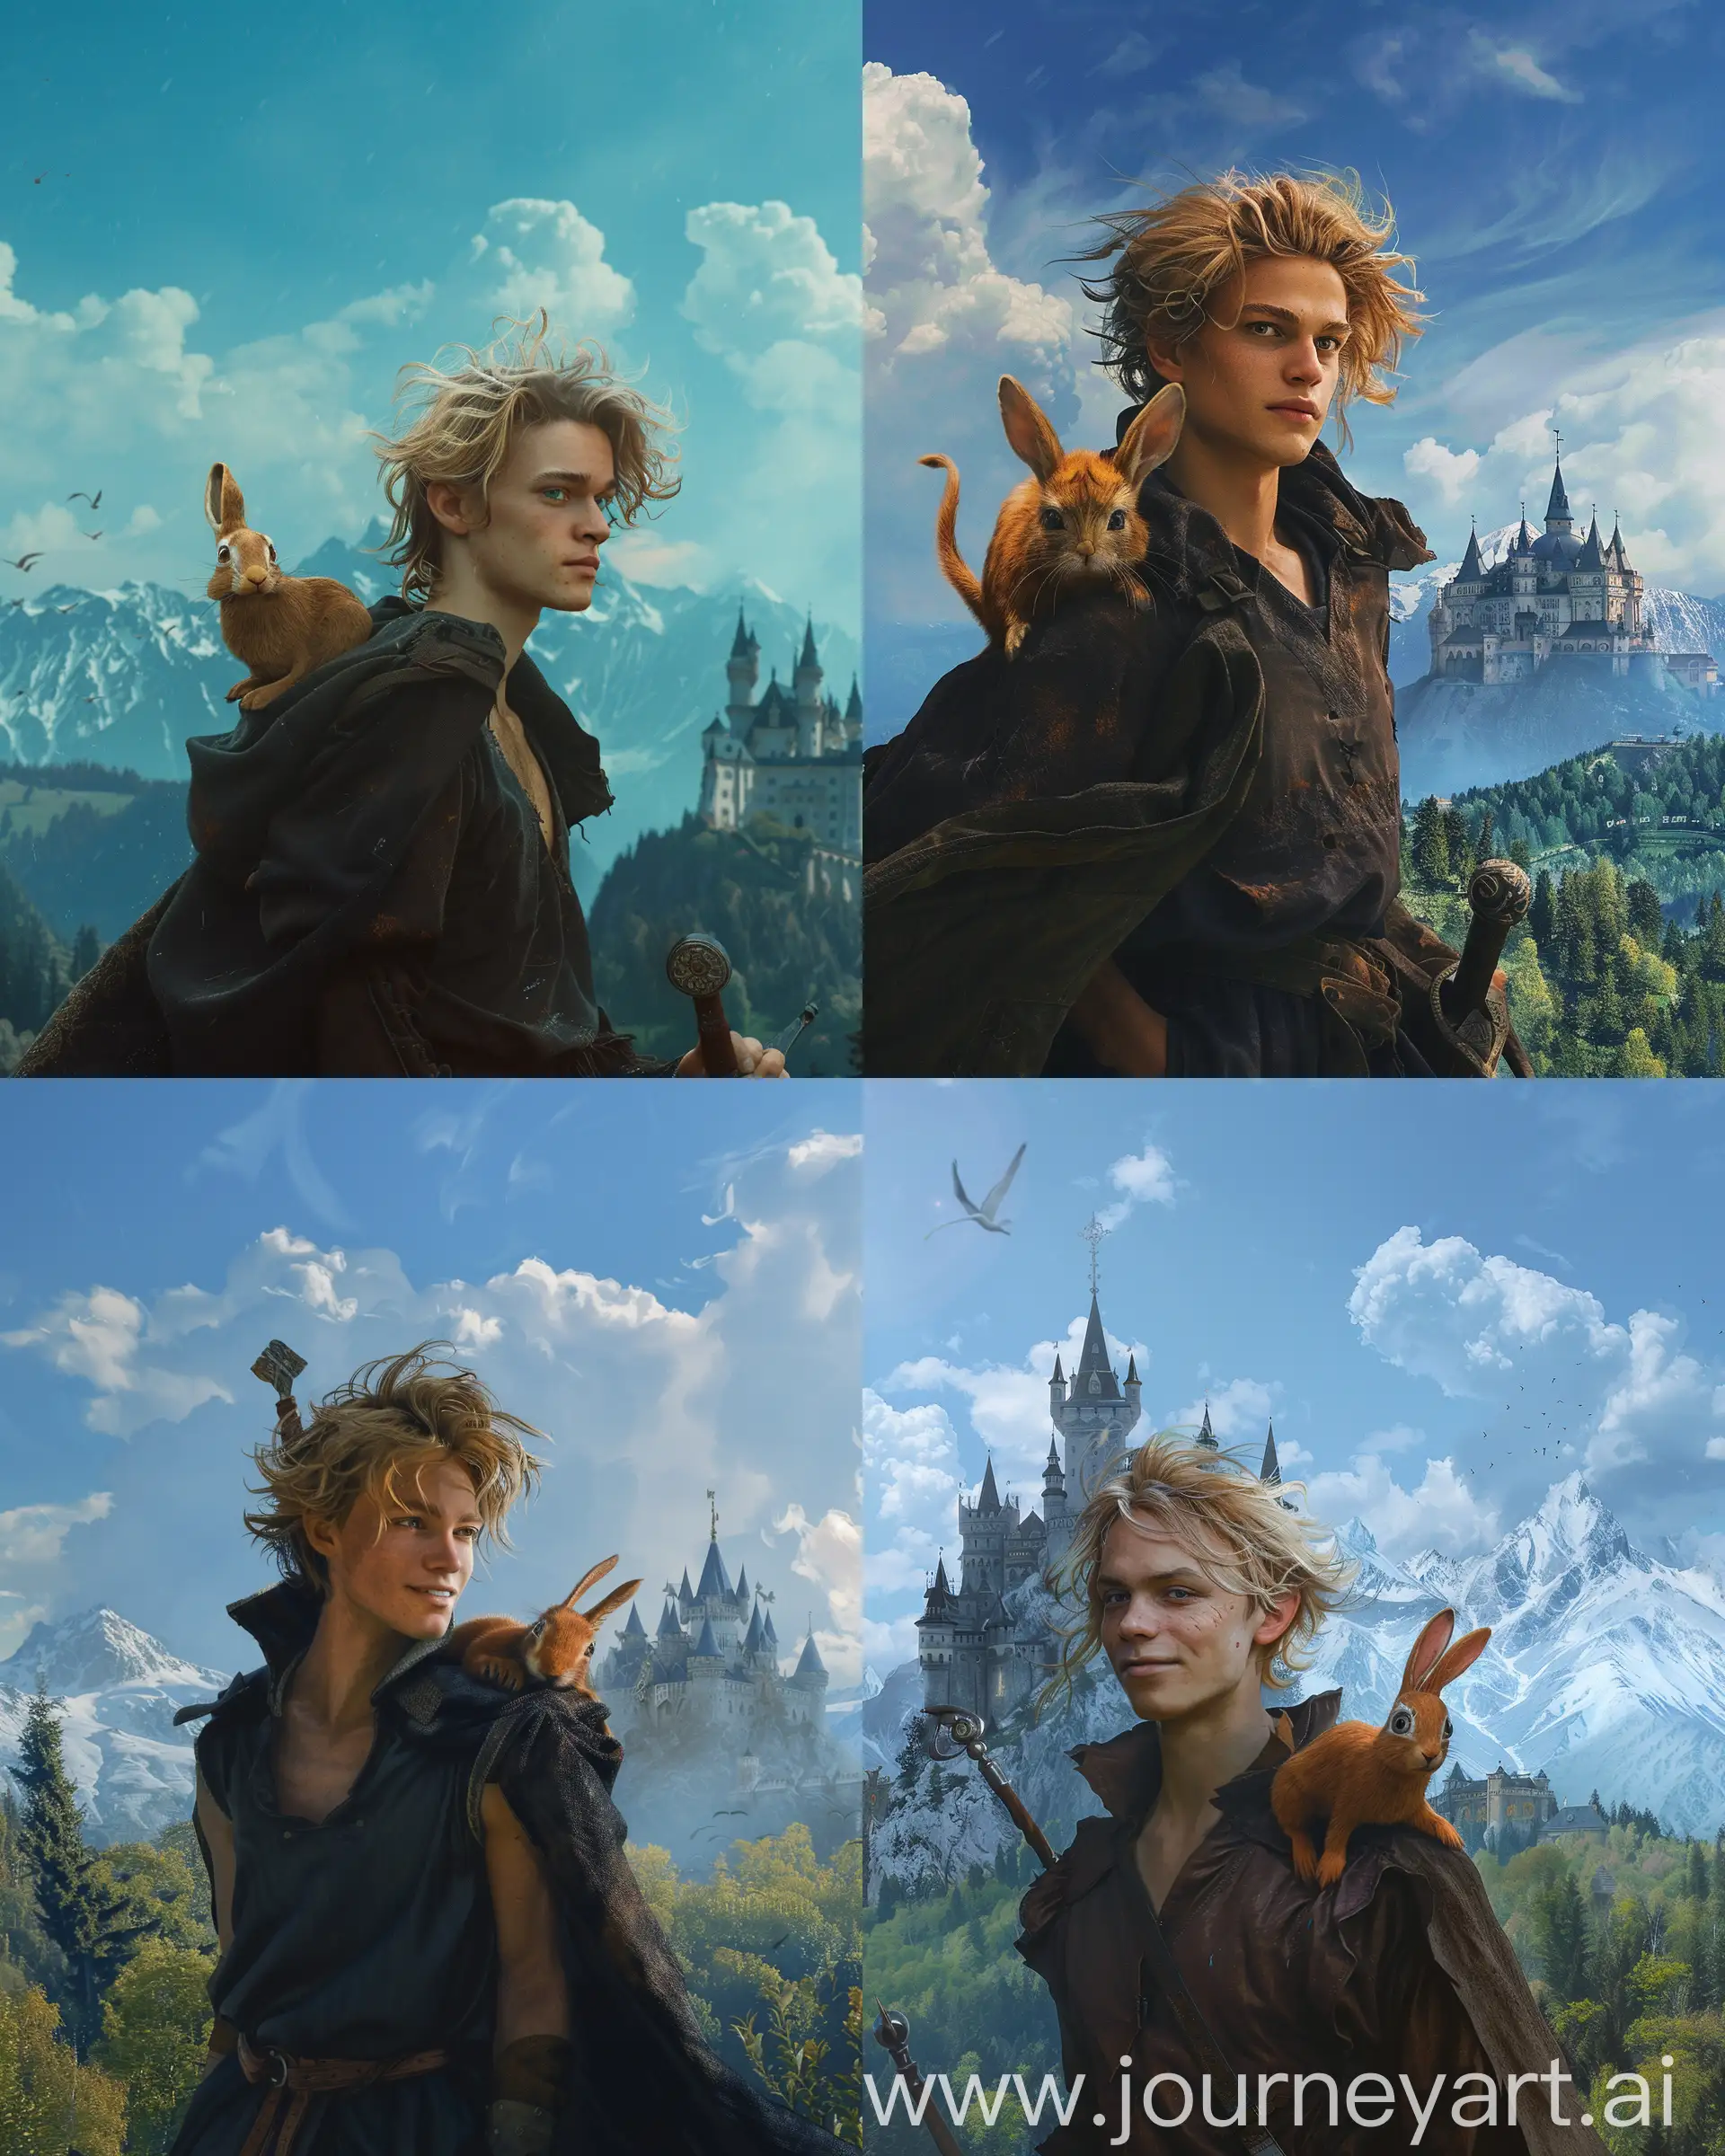 The windy background is probably a little fuzzy.  In the foreground is a young man, looking slightly to the side, a slight smile on his lips. His image is knee-high. 
In the background under the blue sky on one side can be seen the outline of a royal castle with several turrets. On the other side are high mountains with snow-covered peaks, with a dense forest at their foot 
A man in his 20s, with blond disheveled hair below his shoulders, with a pale, refined face, pleasant in appearance. His eyebrows are light, like a true blond. He is dressed in a dark, knee-length camisole of the Middle Ages type. Behind his back is a long cloak with a deep hood. It develops slightly, as if from the wind. In his hands he holds a short sword with a strong hilt and a carved guard. On his shoulder sits an unusual ginger beast the size of a cat. It has long ears like a hare, large eyes, and a snout with a slightly extended nose. The animal also looks in the same direction as the young man, but there is fear in its eyes. The sky above the palace, the mountains and the heroes is pre-thunderstorm, with clouds just gathering and the sun still peeking through, --ar 4:5